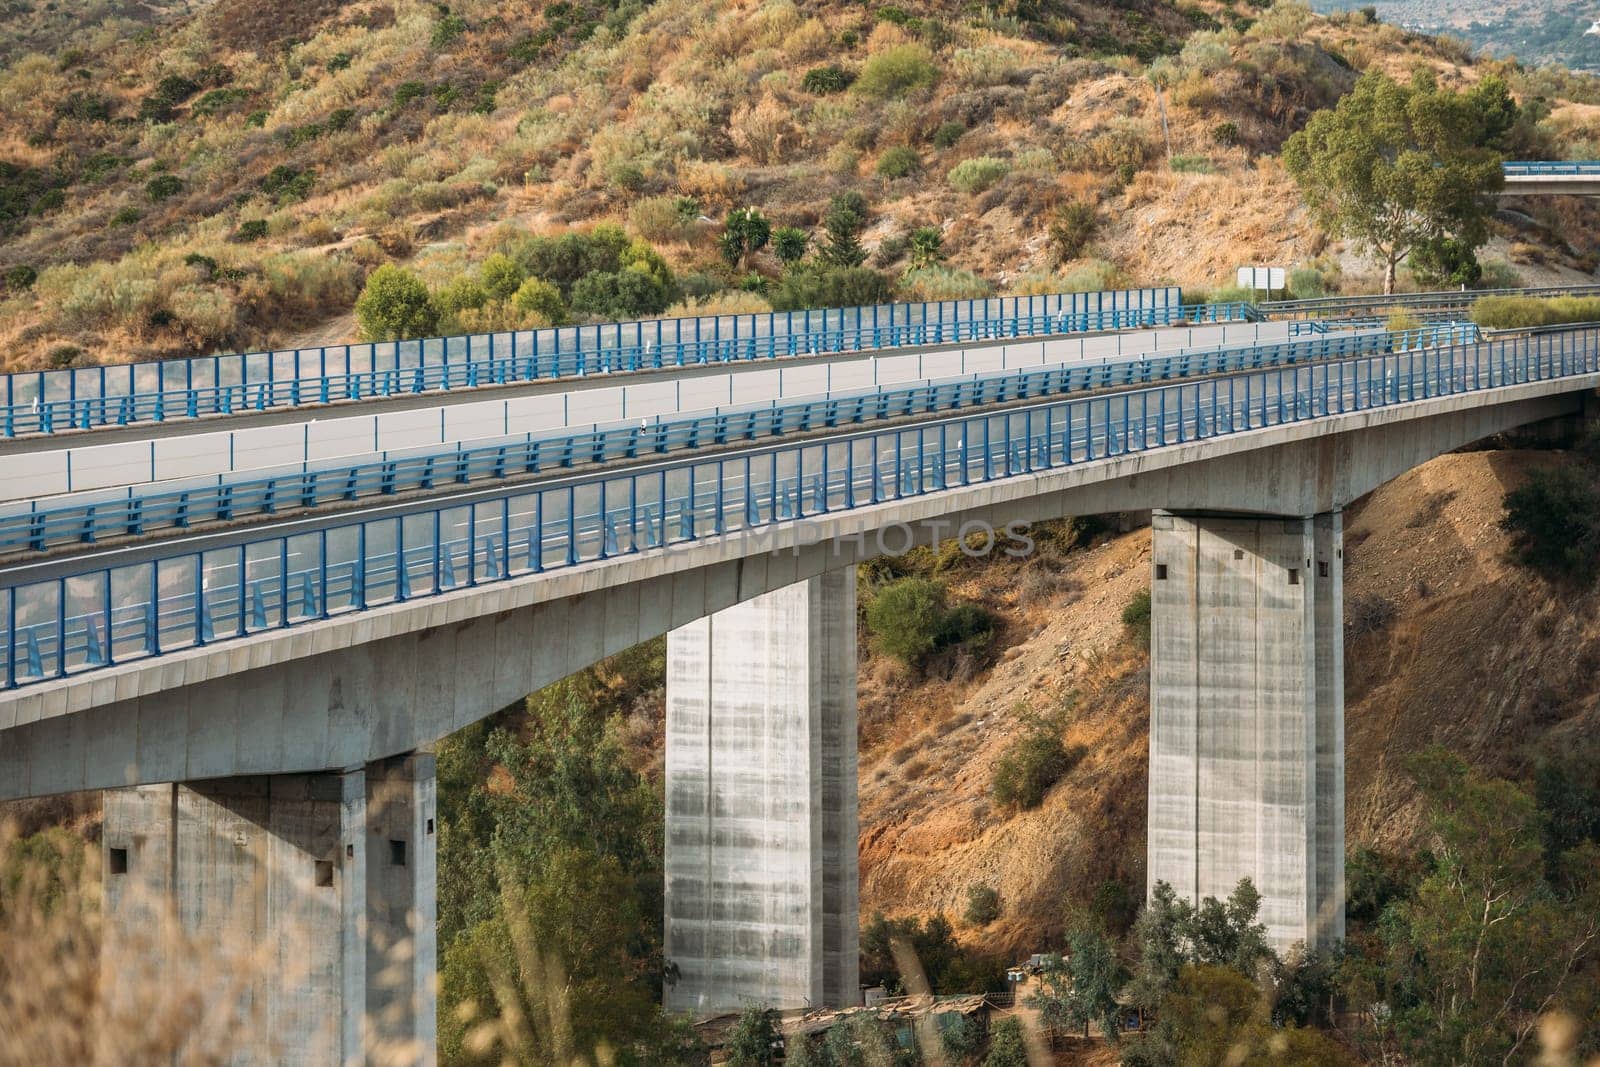 Modern highway bridge with striking architecture and sturdy supporting columns for efficient transportation.